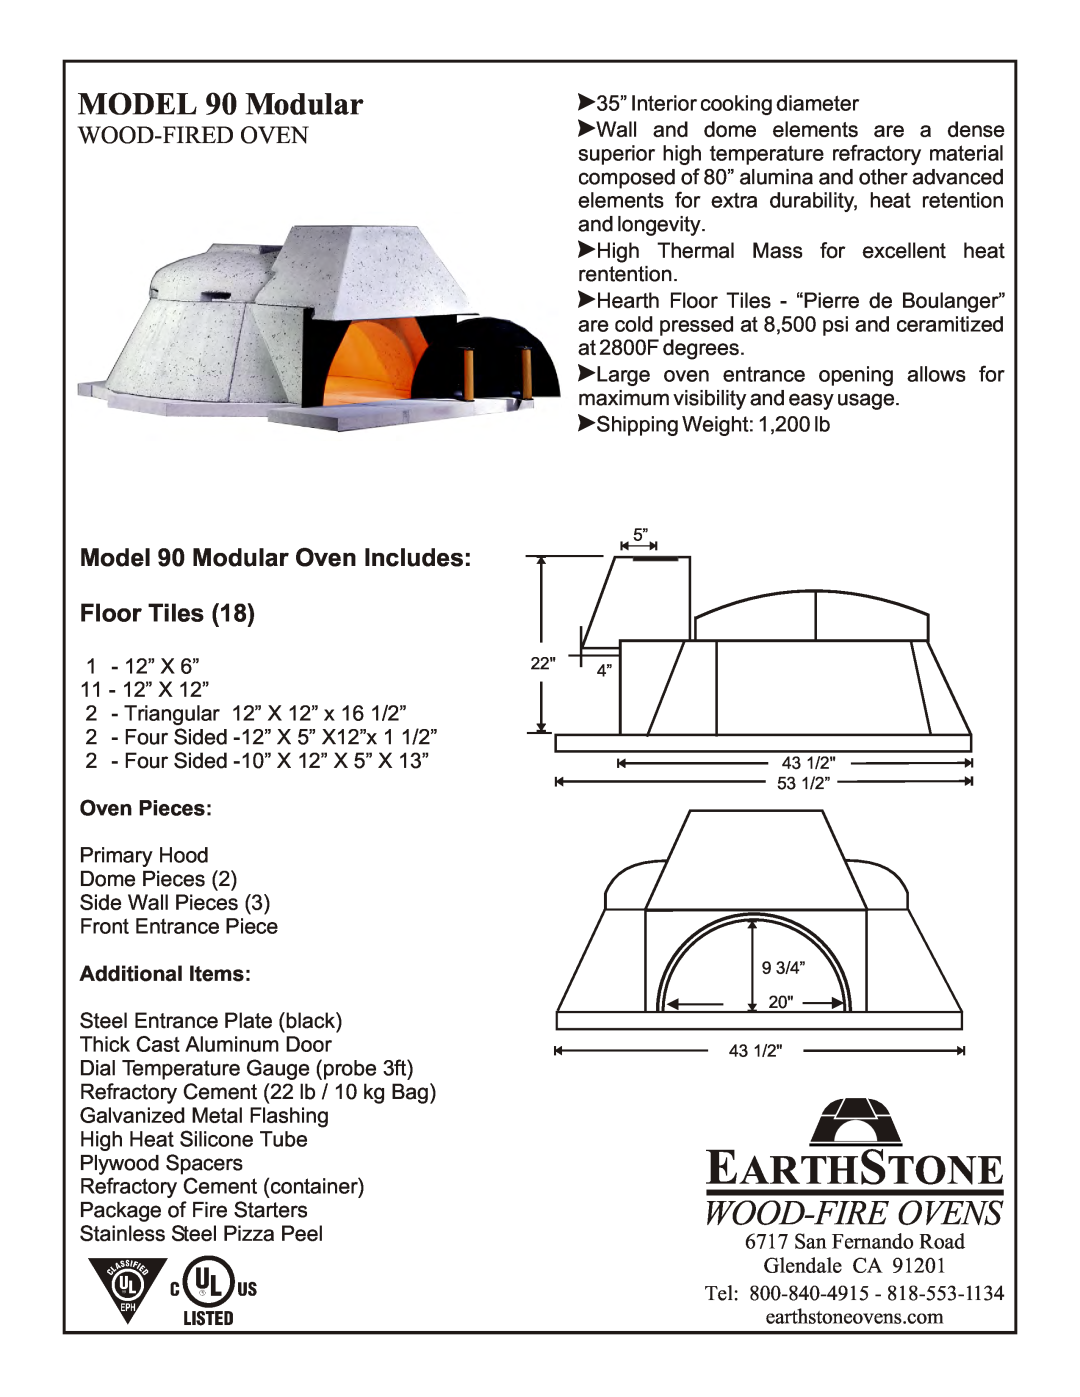 EarthStone manual Earthstone, Wood-Fire Ovens, MODEL 90 Modular, Wood-Fired Oven, earthstoneovens.com, Oven Pieces 